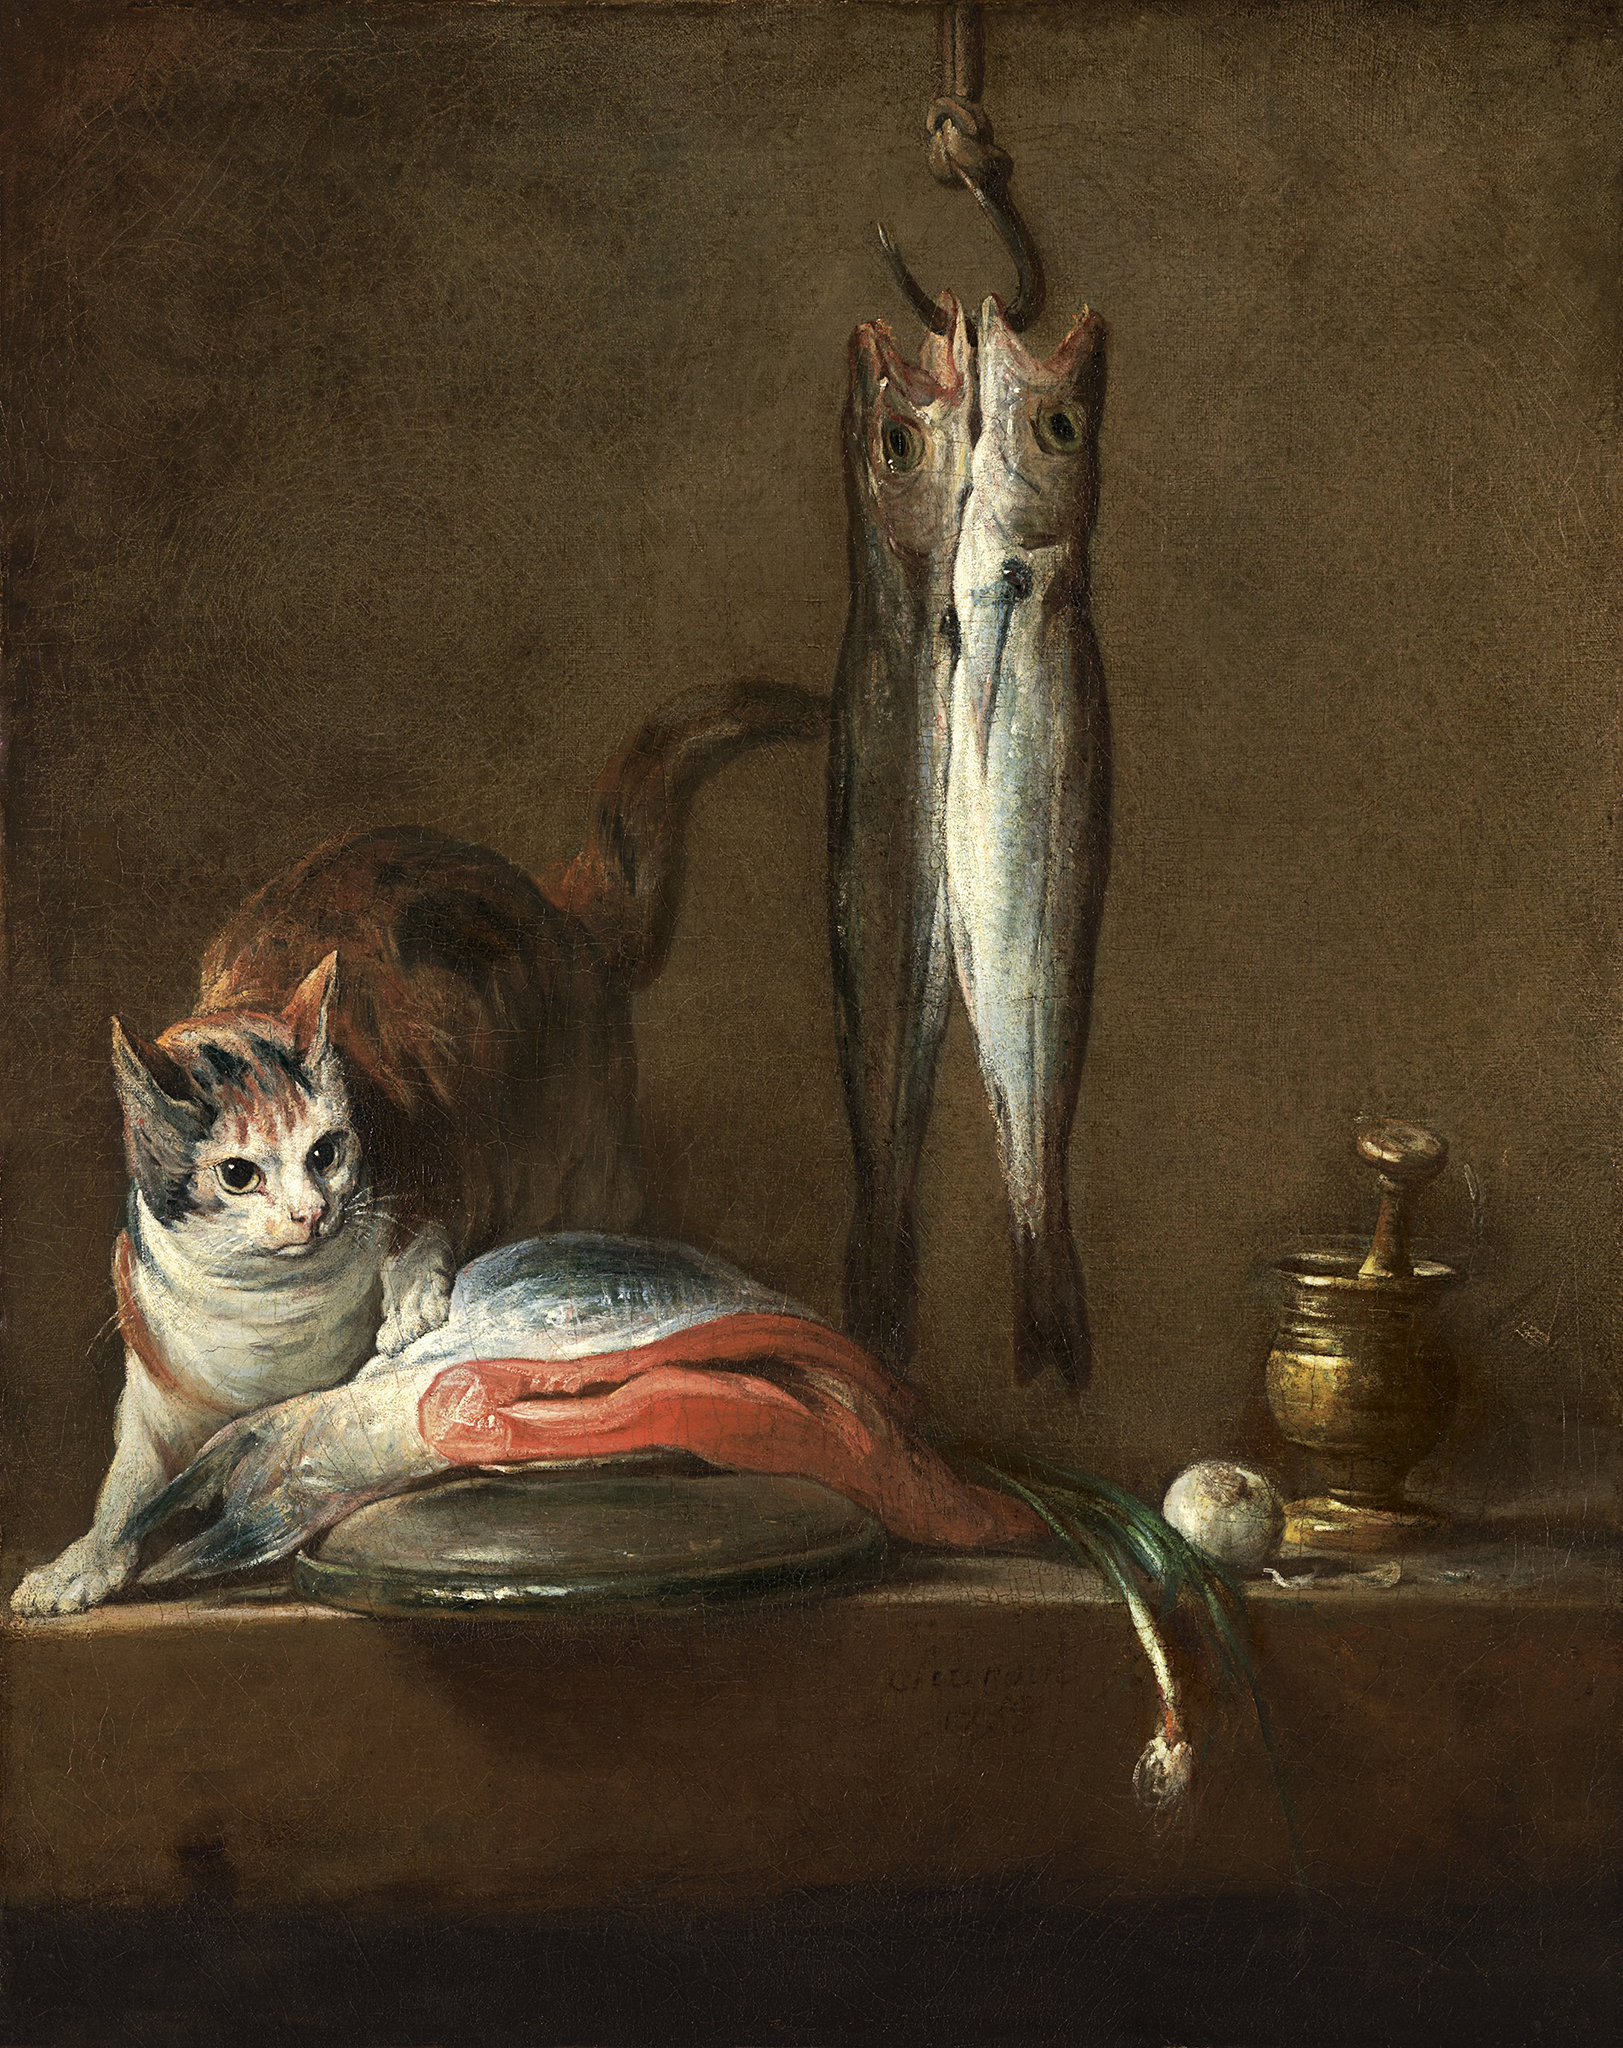 A painting depicting a white cat with orange and black stripes resting its paw on a cut of fish on a counter. To the right of the cat, two fish hang by a hook cutting through their mouths. The hook is held up by a rope.